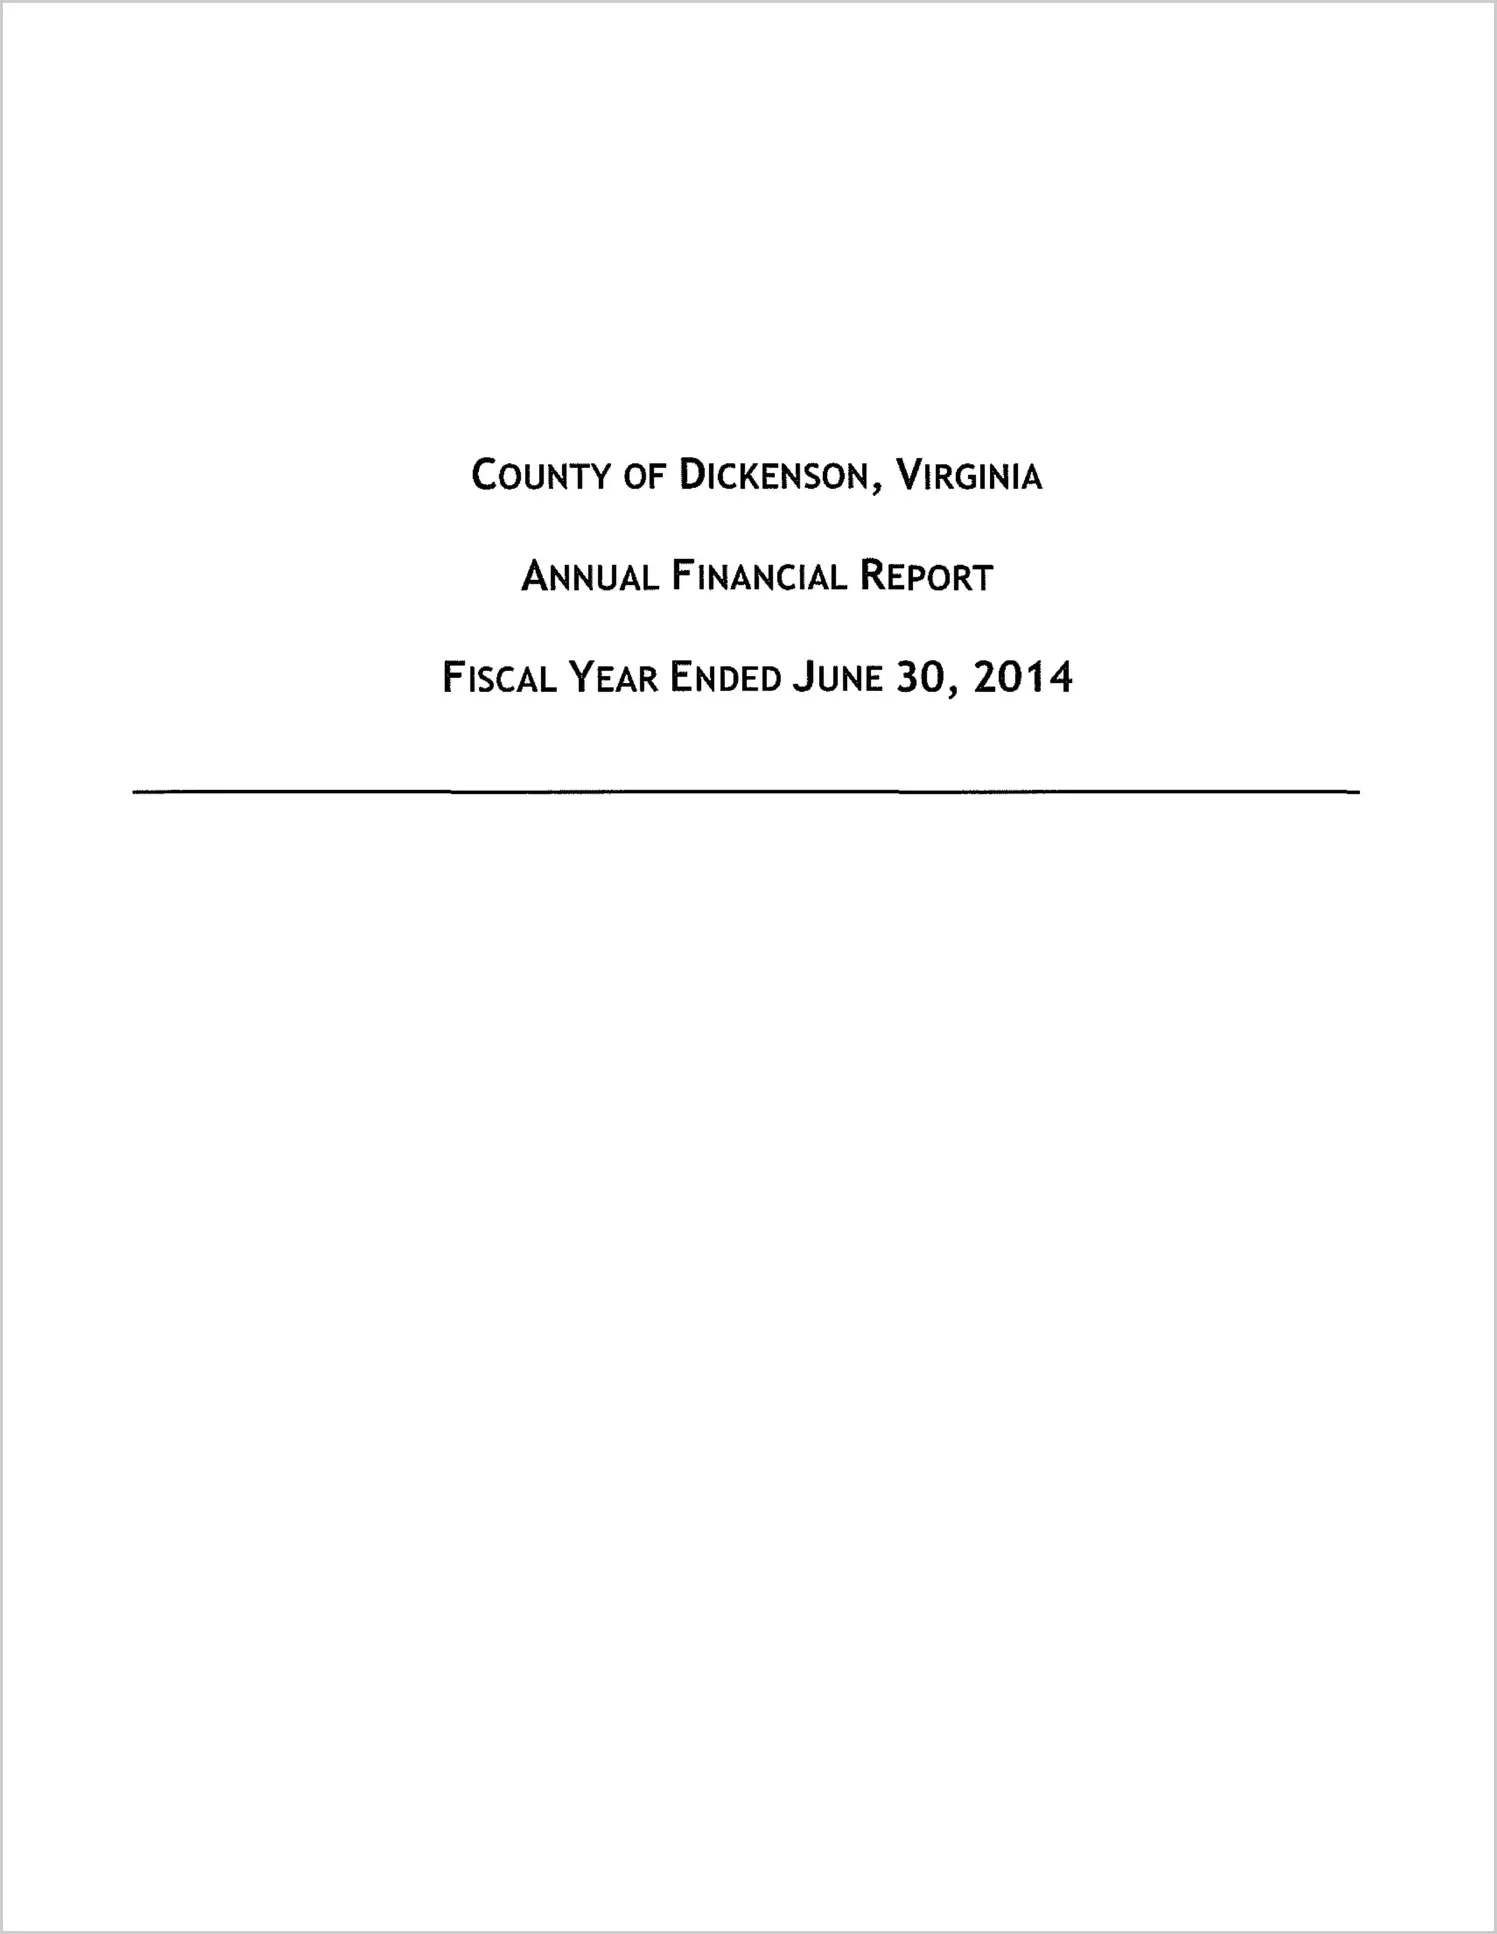 2014 Annual Financial Report for County of Dickenson